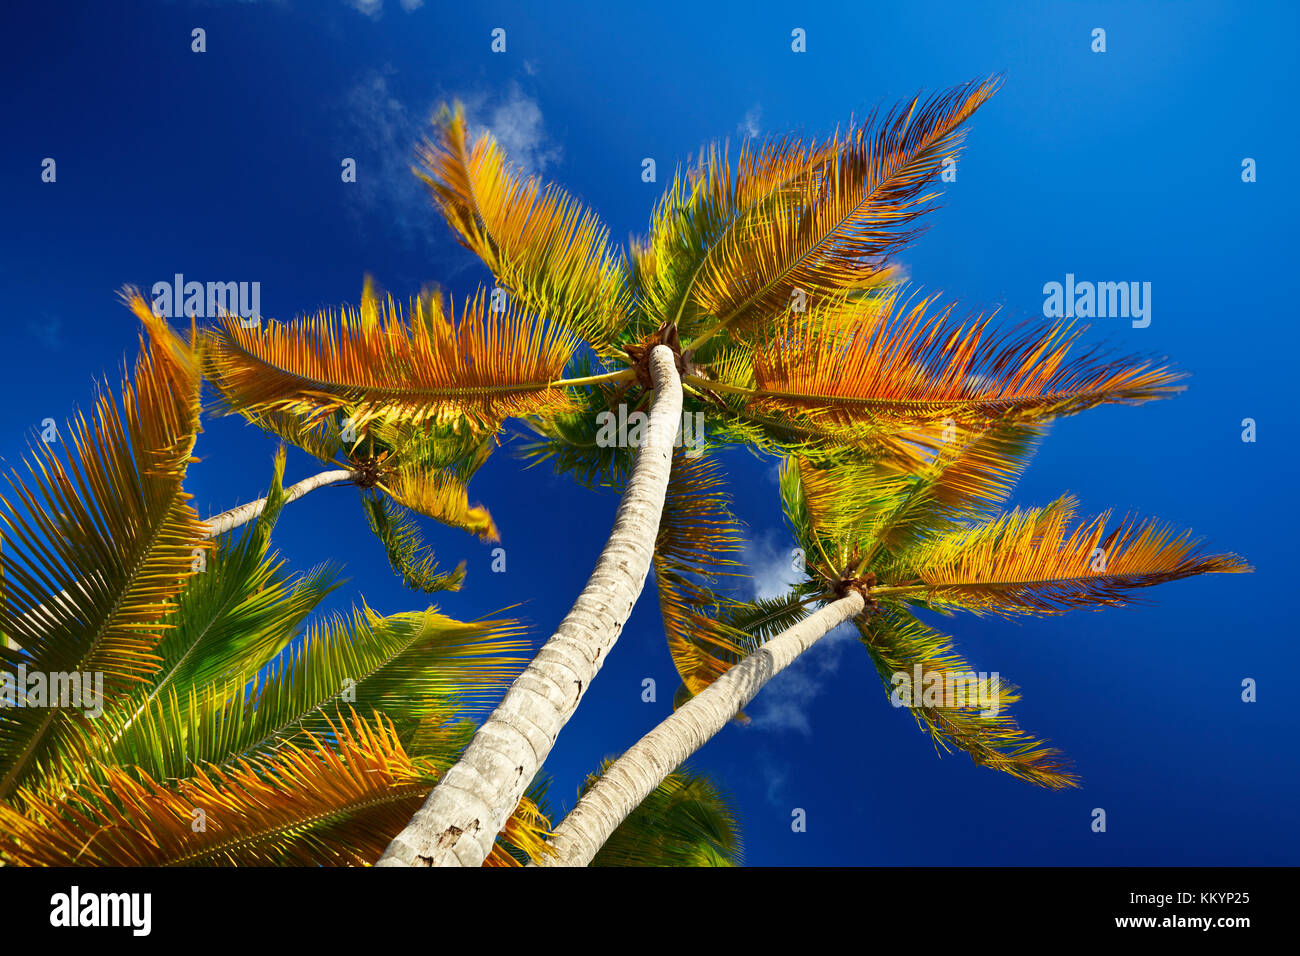 Beautiful coconut palm trees from below with strong polarizer effect. Stock Photo